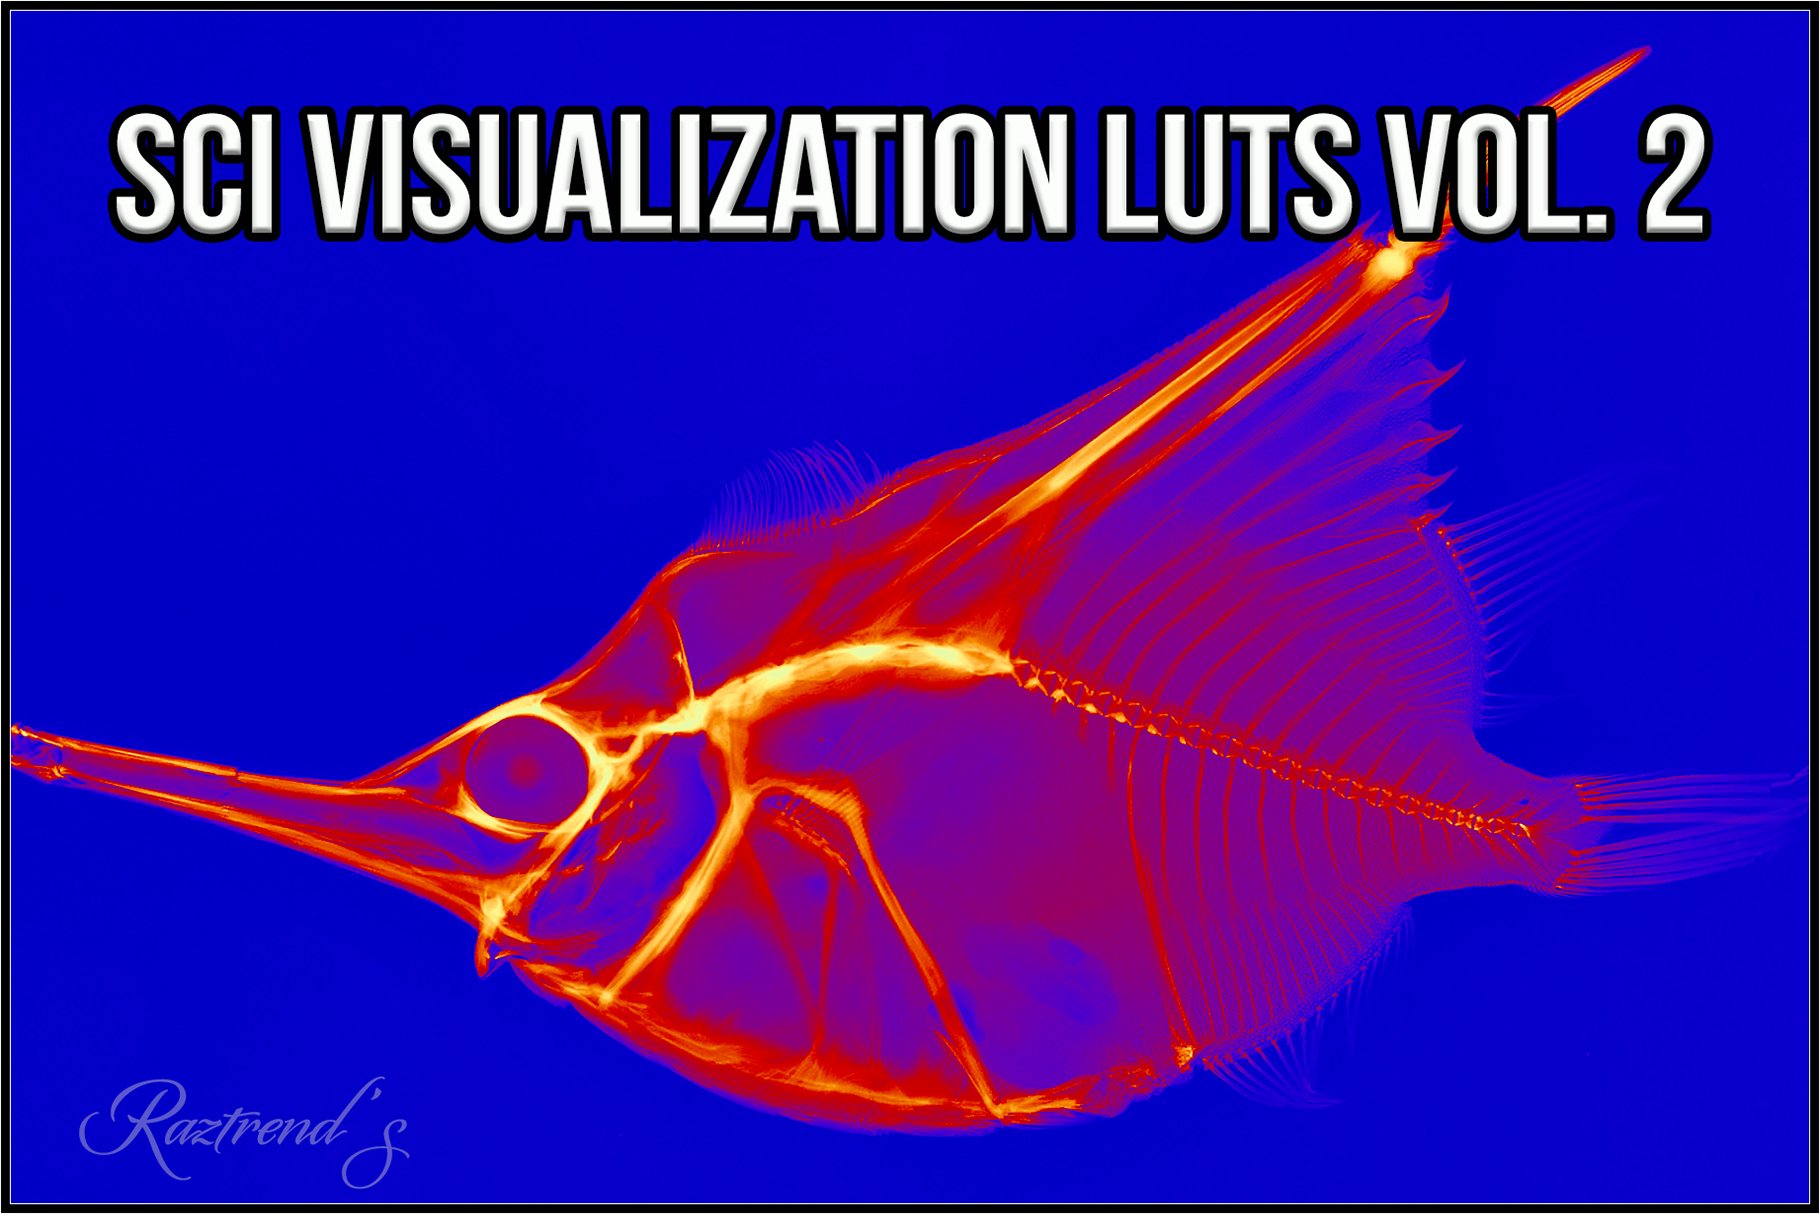 Science Visualization LUTs Vol. 2cover image.